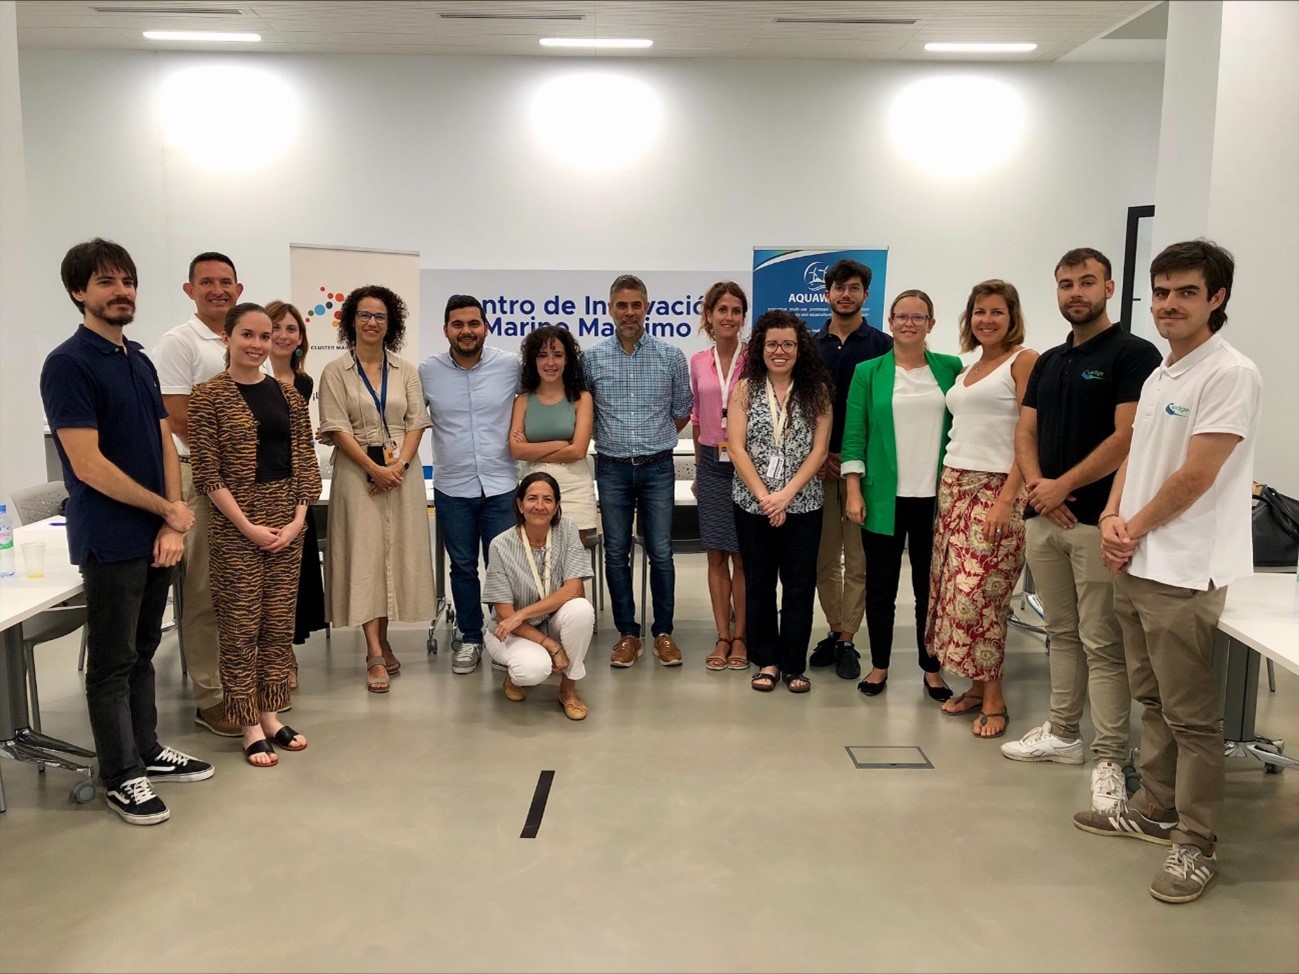 AquaWind project explores synergies in a joint event in Gran Canaria